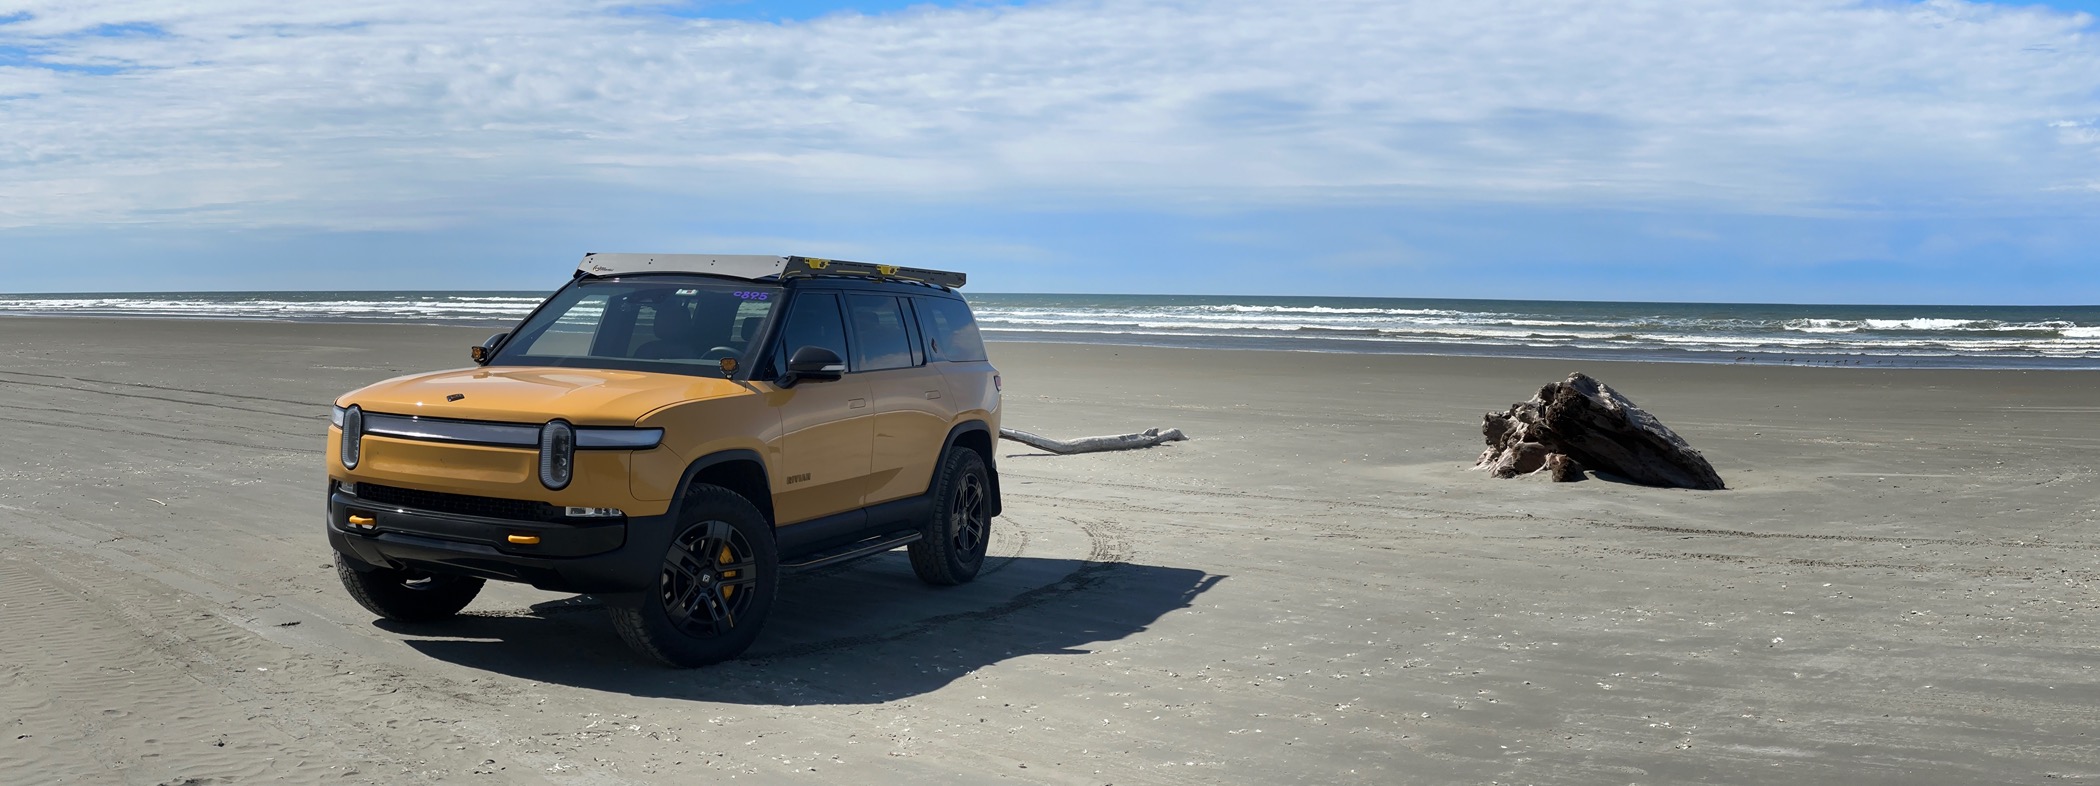 Rivian R1T R1S Random Rivian Photos of the Day - Post Yours! 📸 🤳 IMG_4767